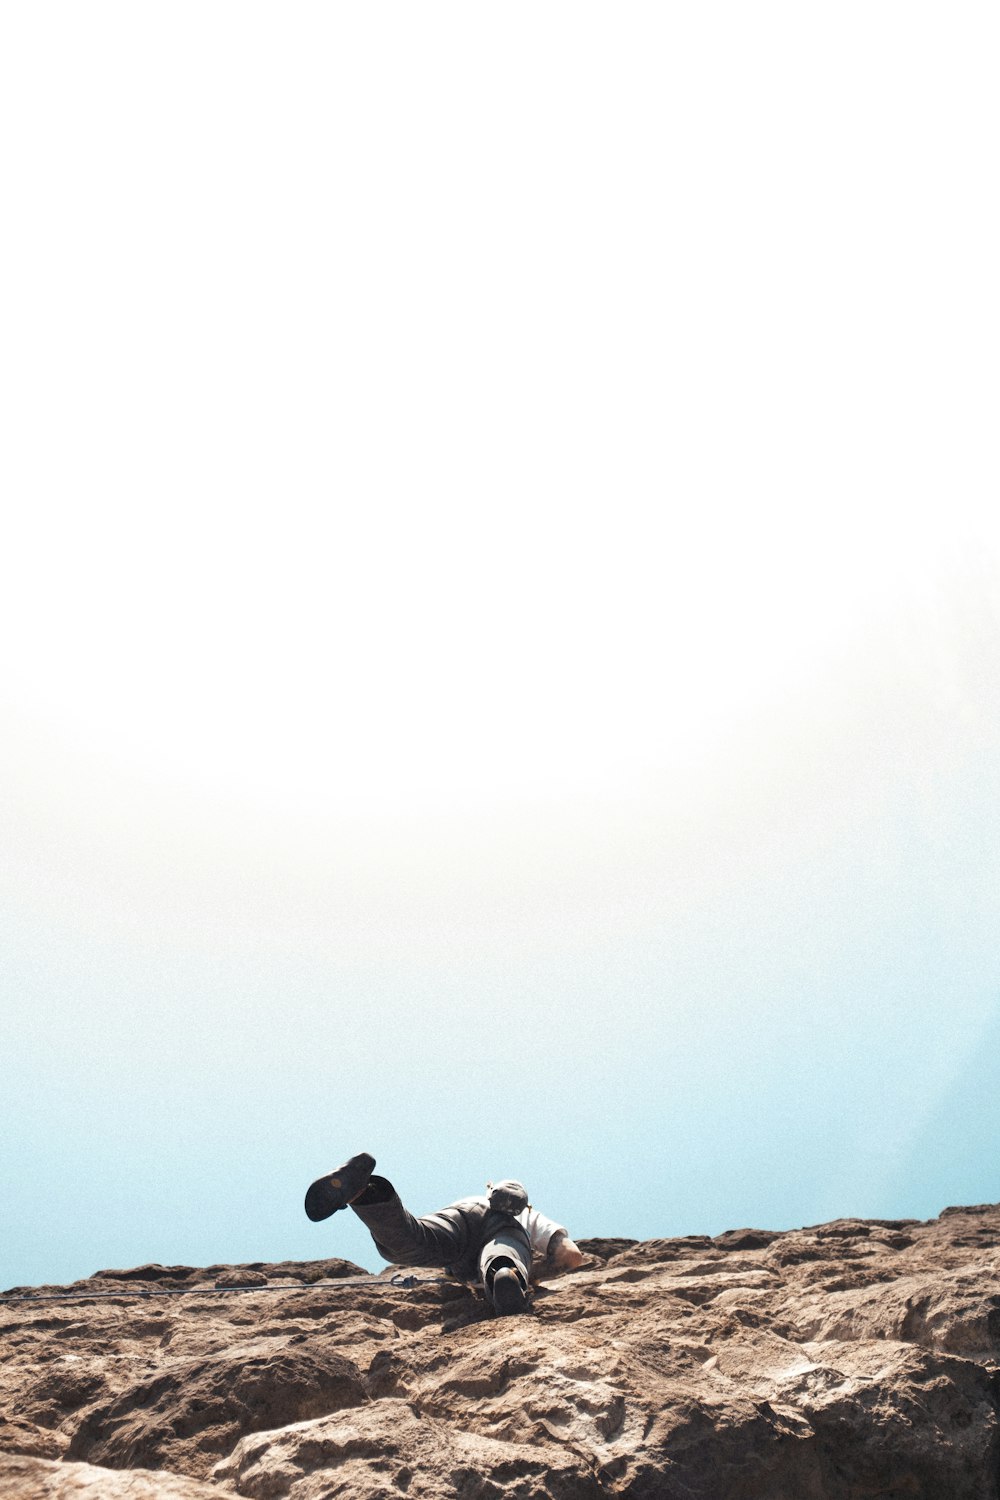 silhouette of man sitting on rock formation during daytime